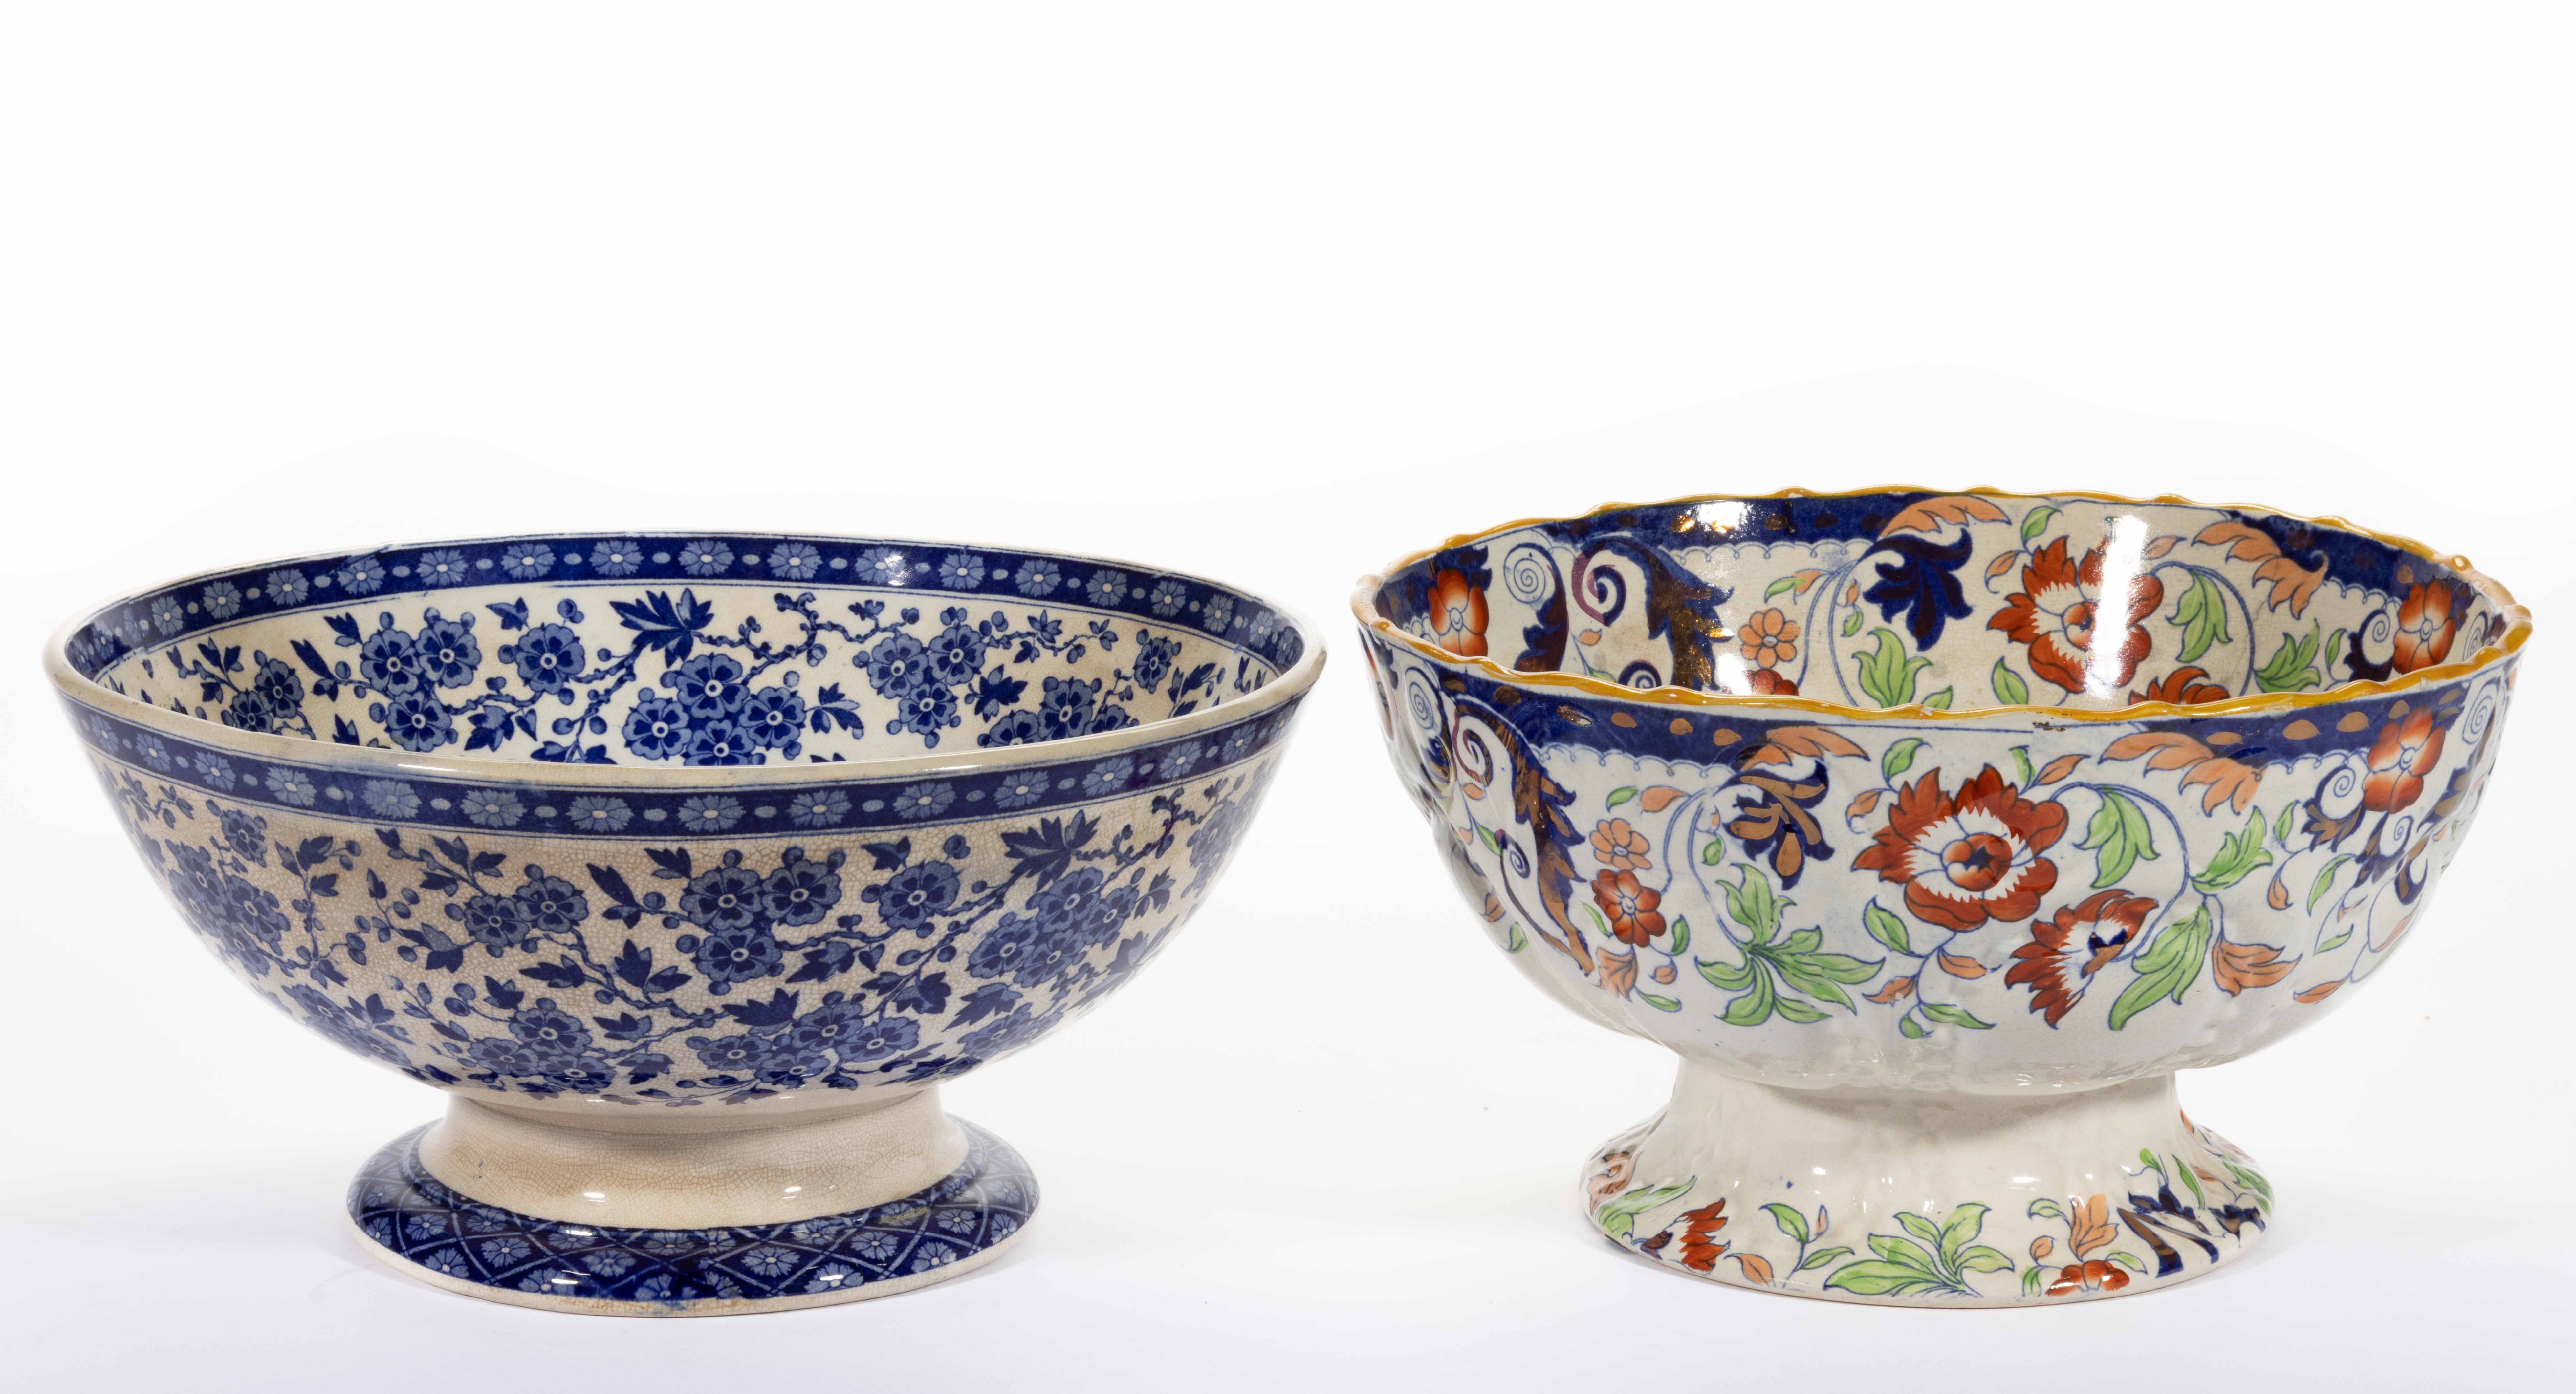 ENGLISH STAFFORDSHIRE TRANSFER-PRINTED CERAMIC PUNCH BOWLS, LOT OF TWO,